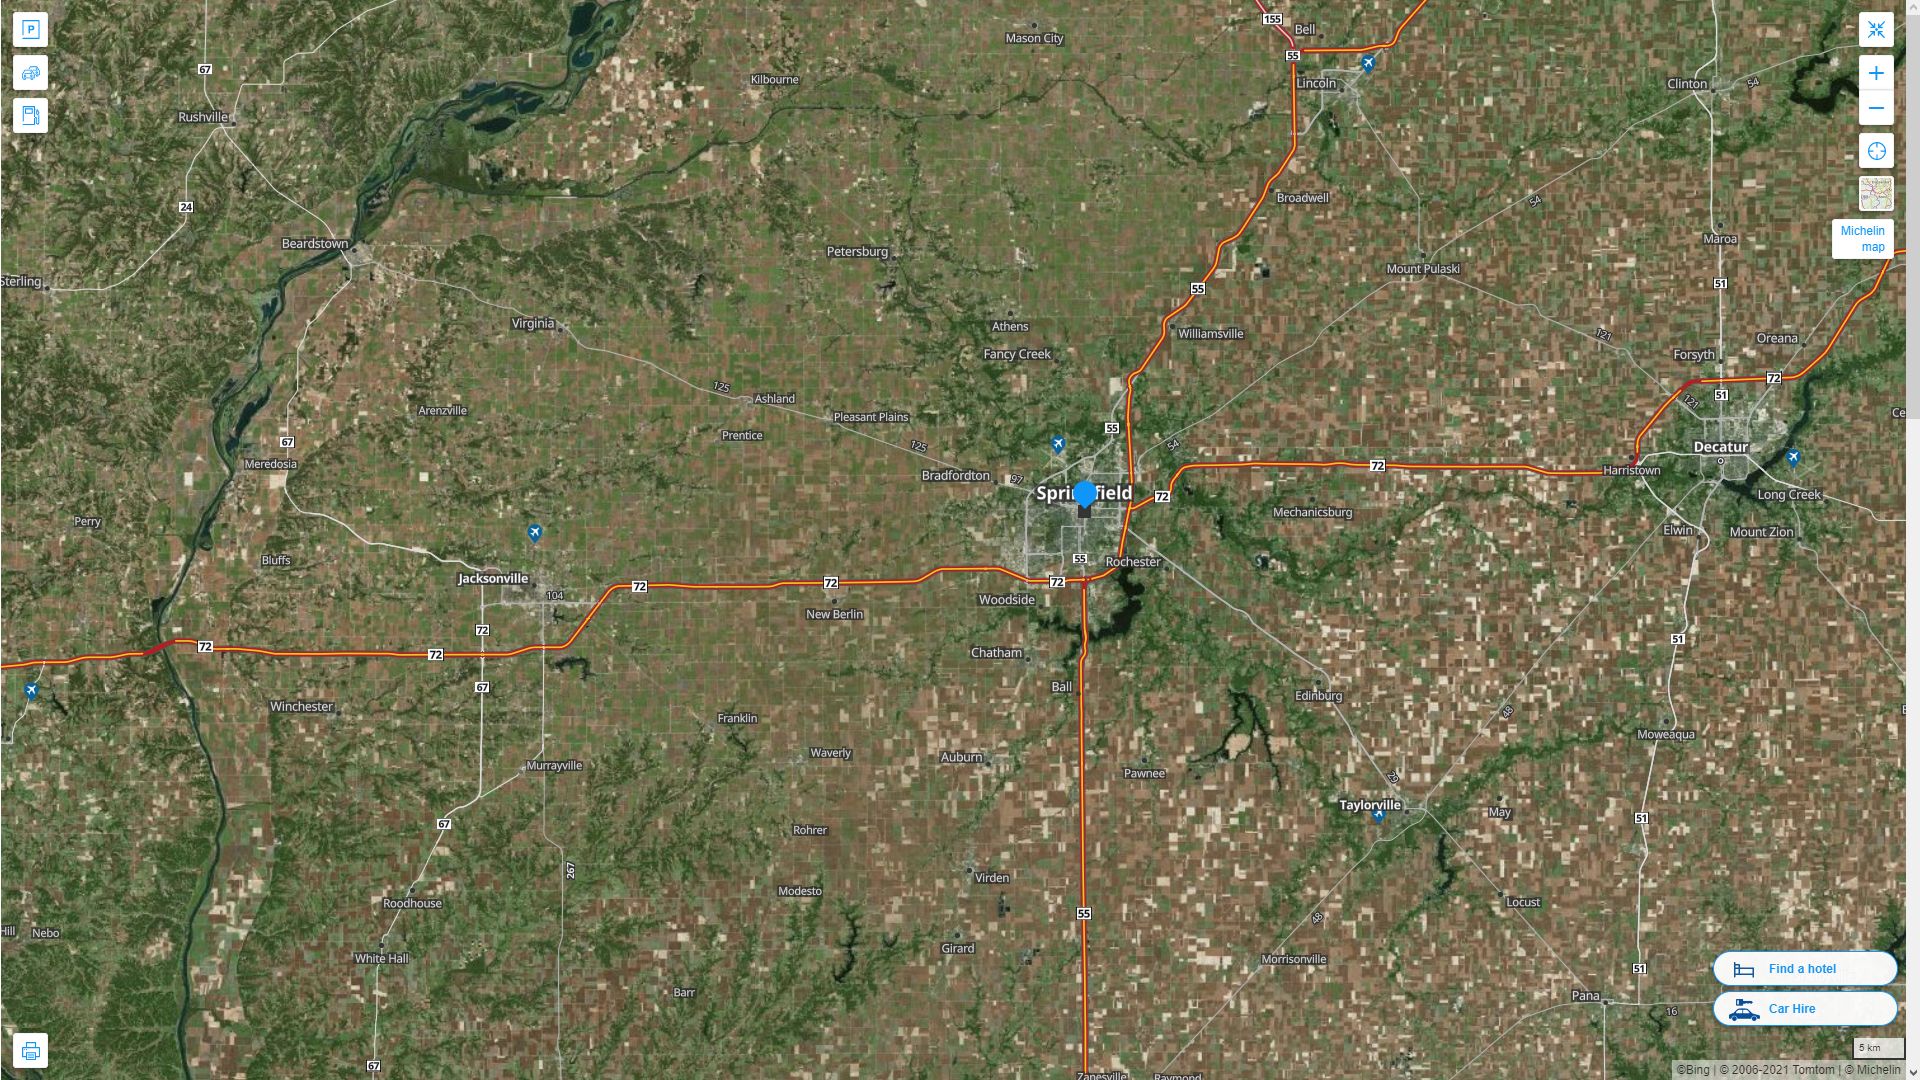 Springfield illinois Highway and Road Map with Satellite View